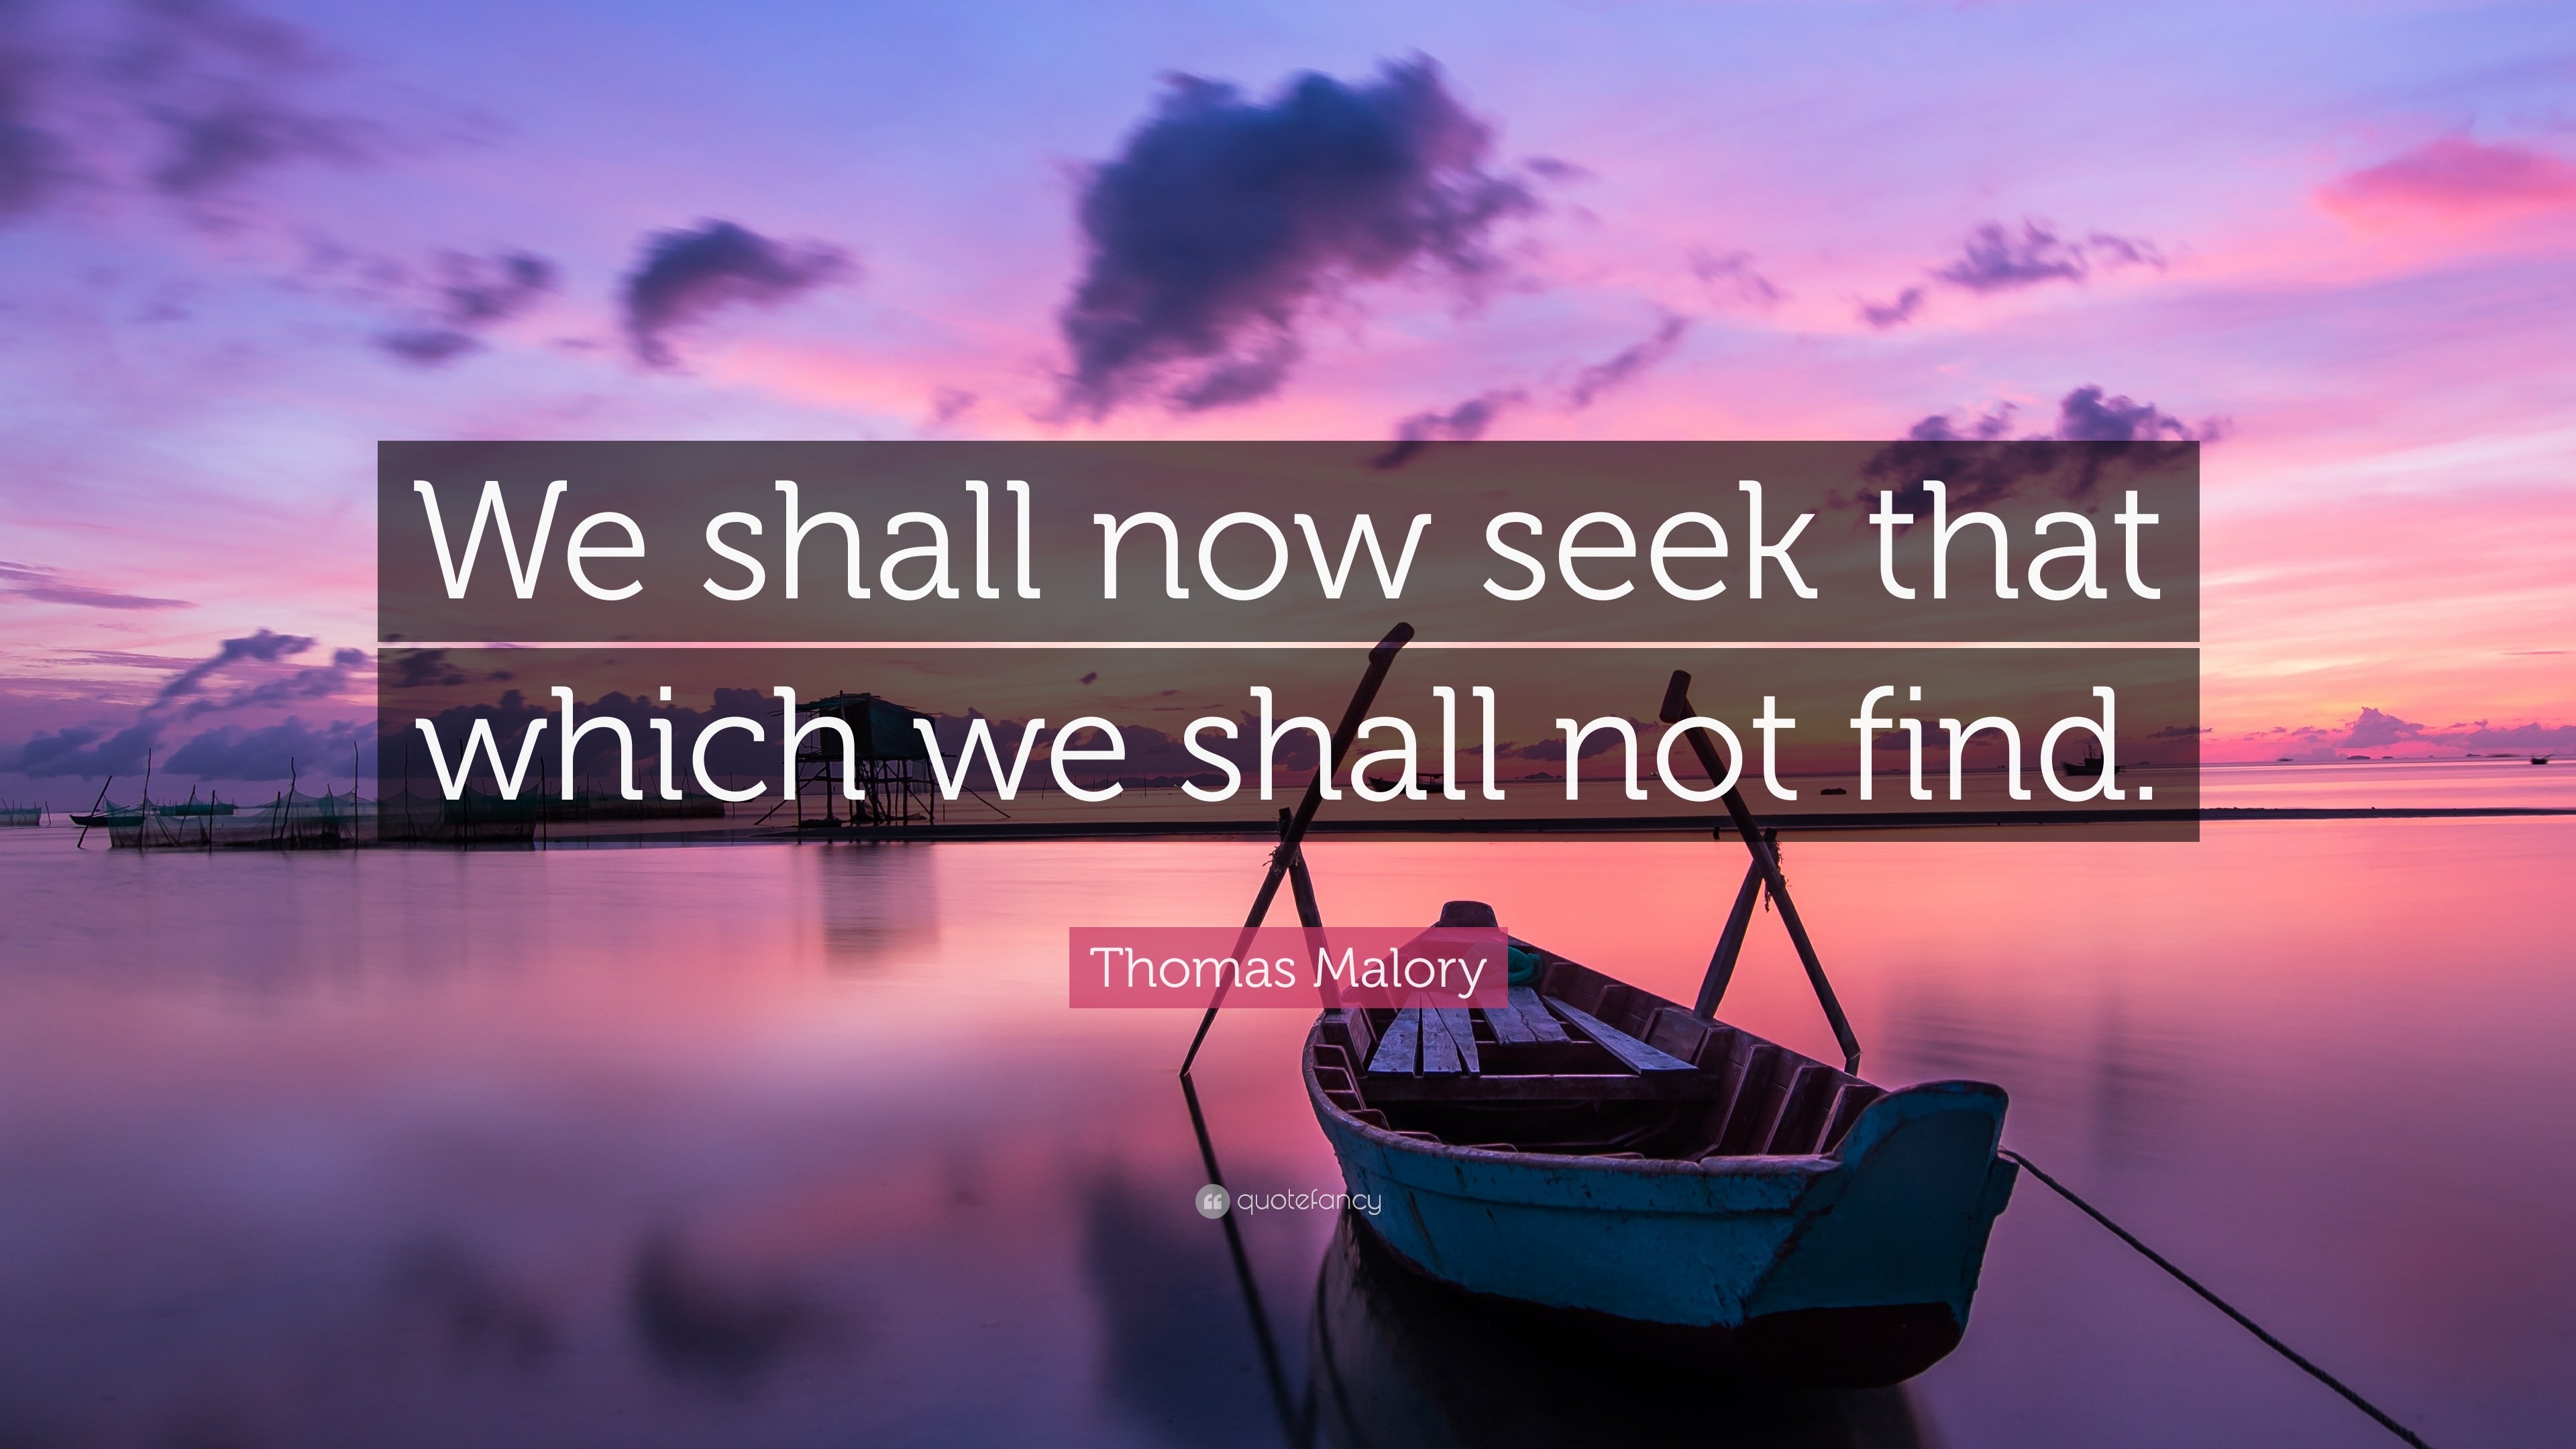 Thomas Malory Quote: “We shall now seek that which we shall not find.”